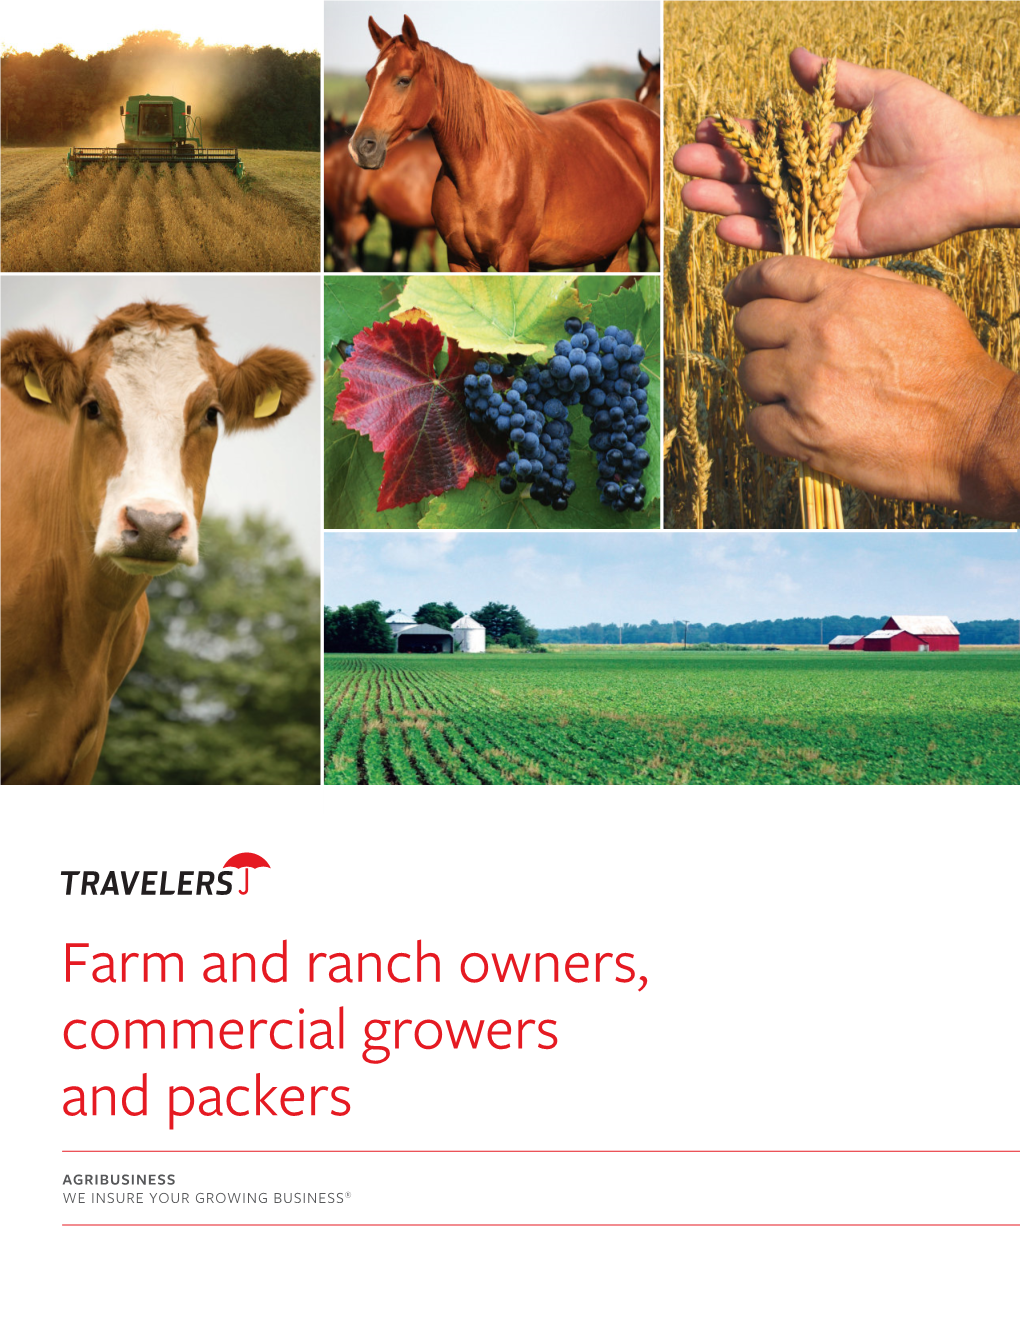 Farm and Ranch Owners, Commercial Growers and Packers